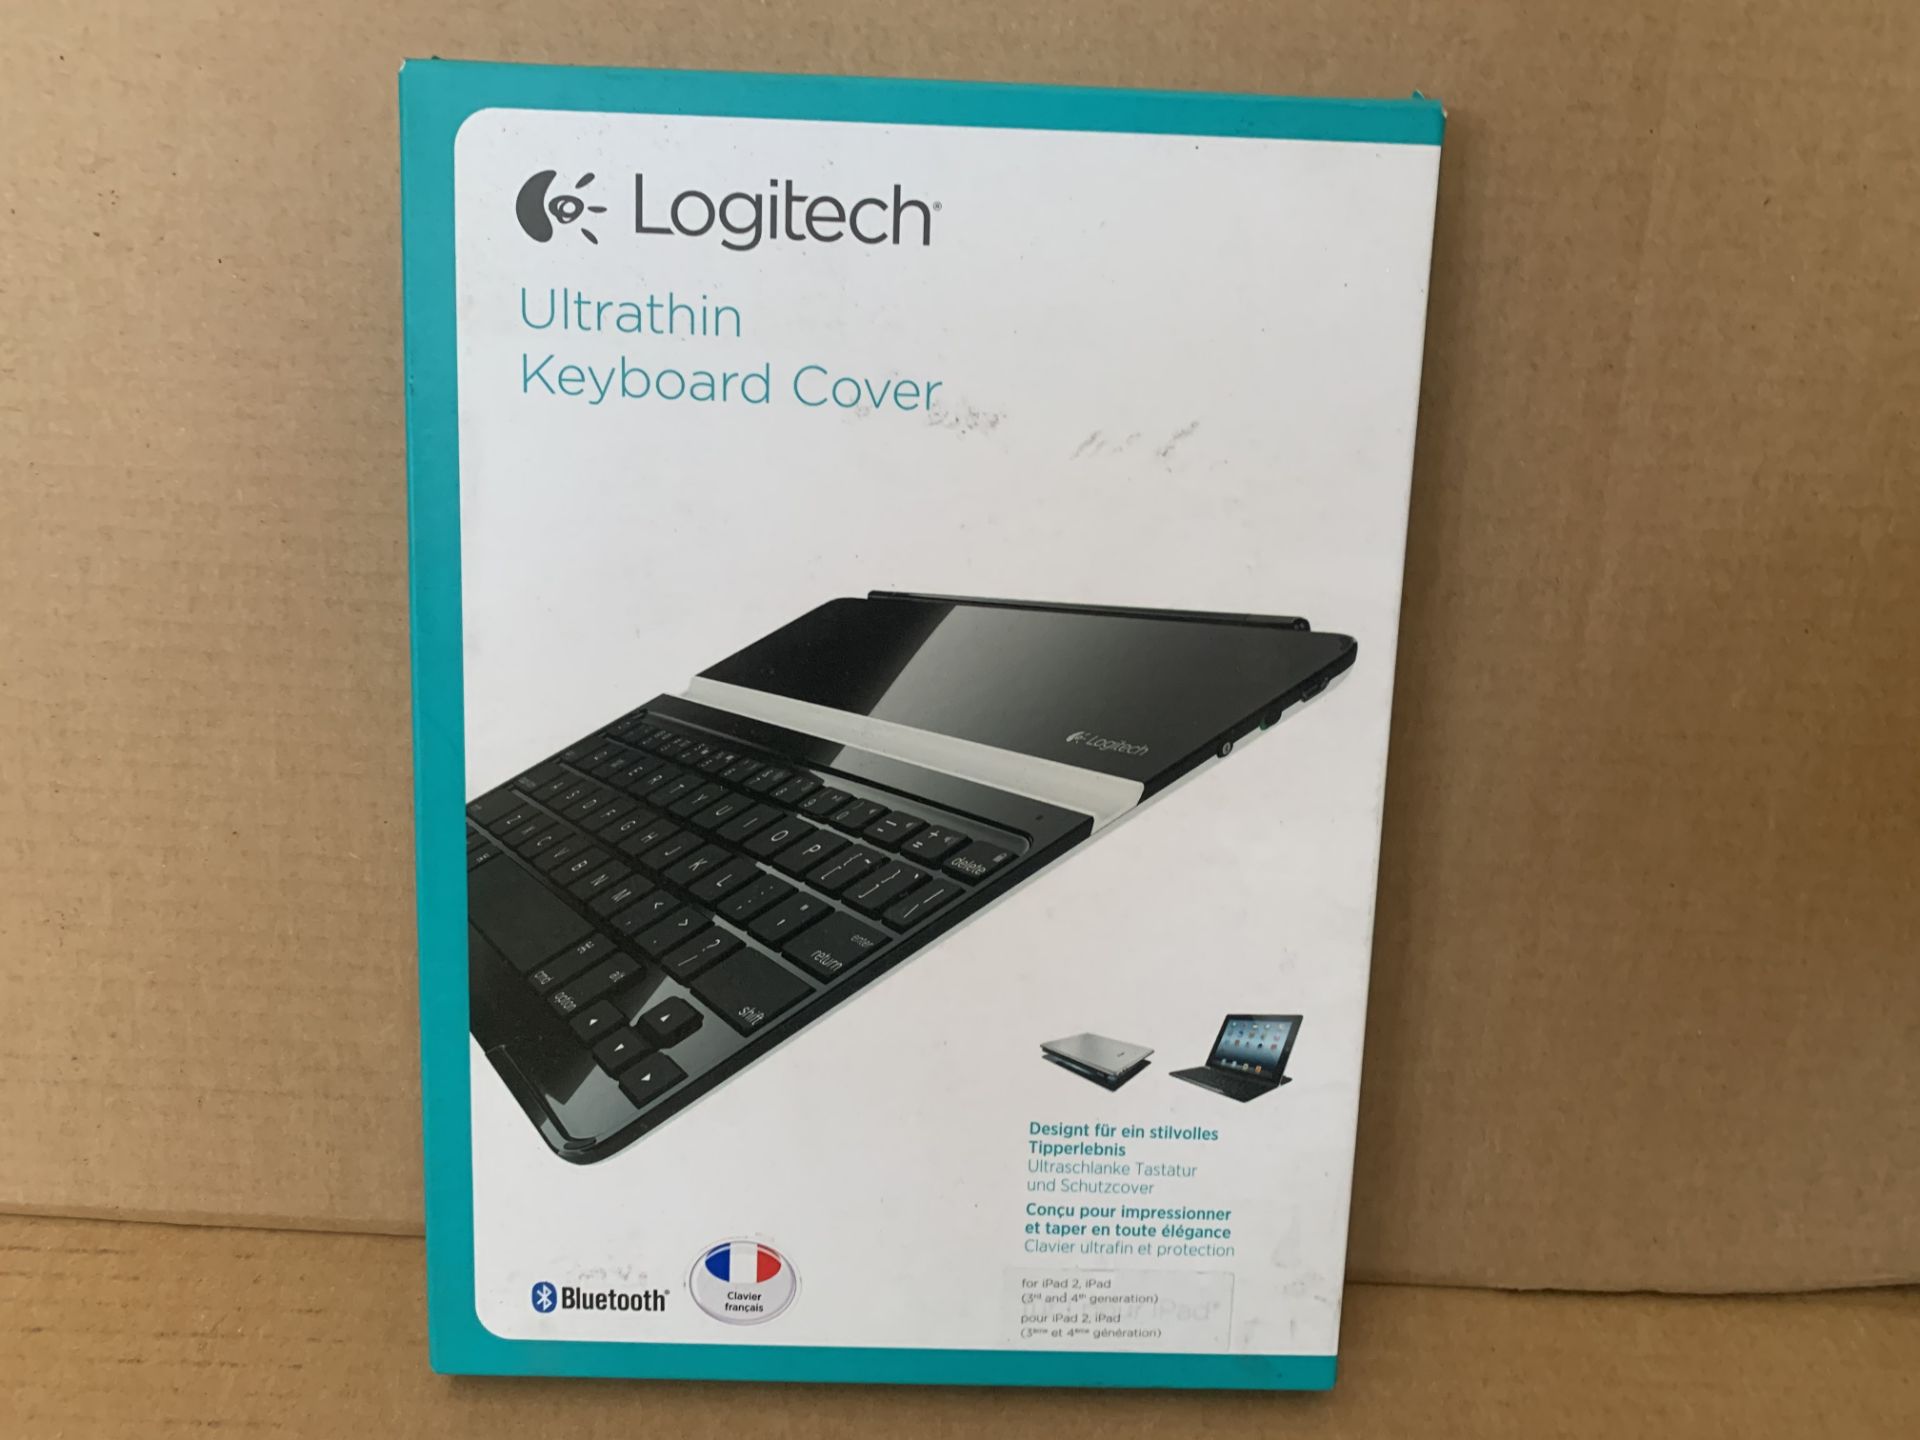 10 X BRAND NEW LOGITECH ULTHARIN KEYBOARD COVERS (FRENCH) FOR IPAD 2